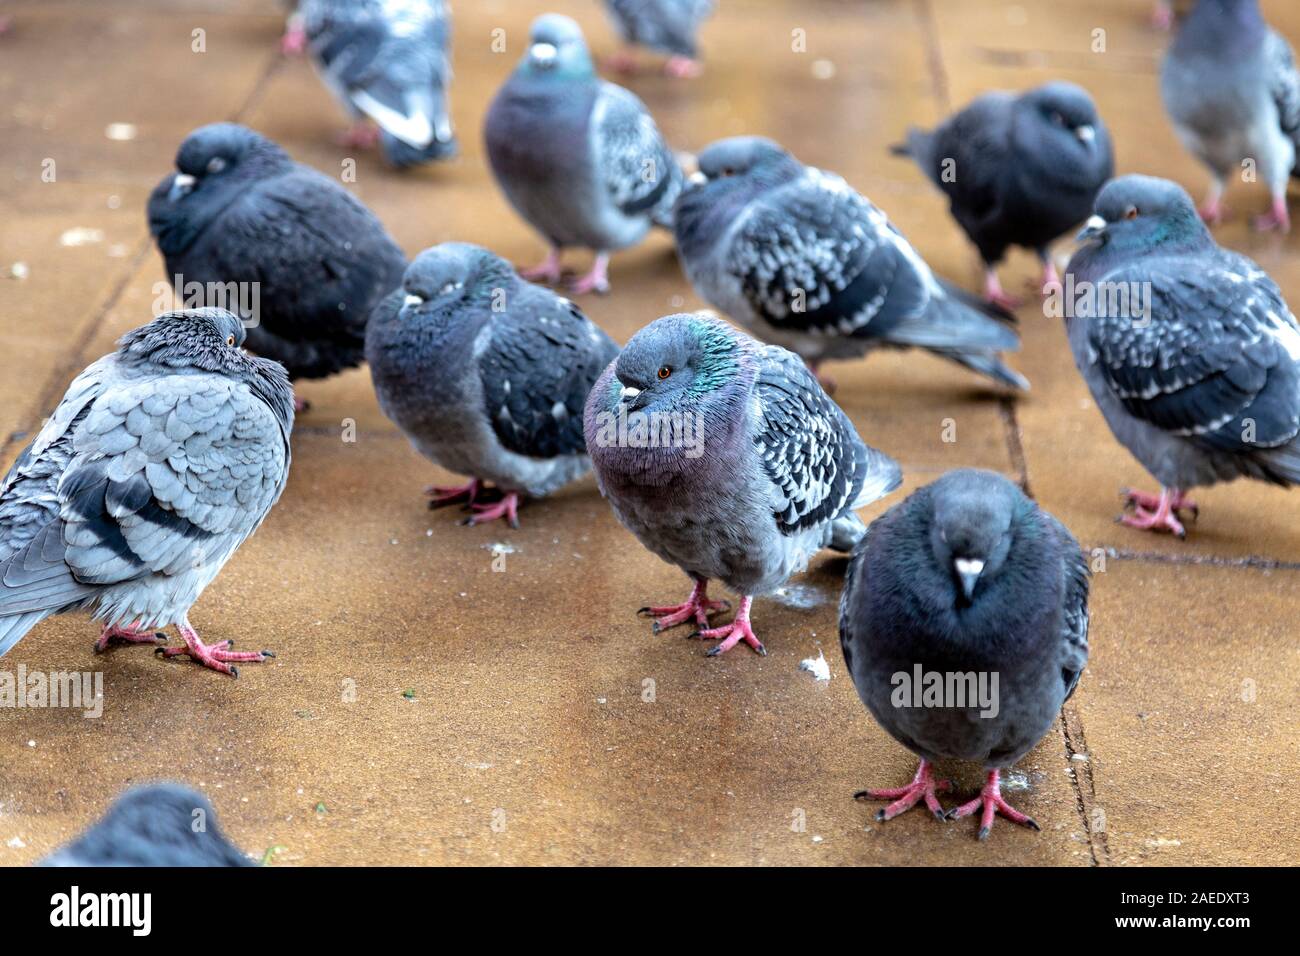 Pigeons using feathers as insulation to keep warm during approaching winter in the city, London, UK Stock Photo